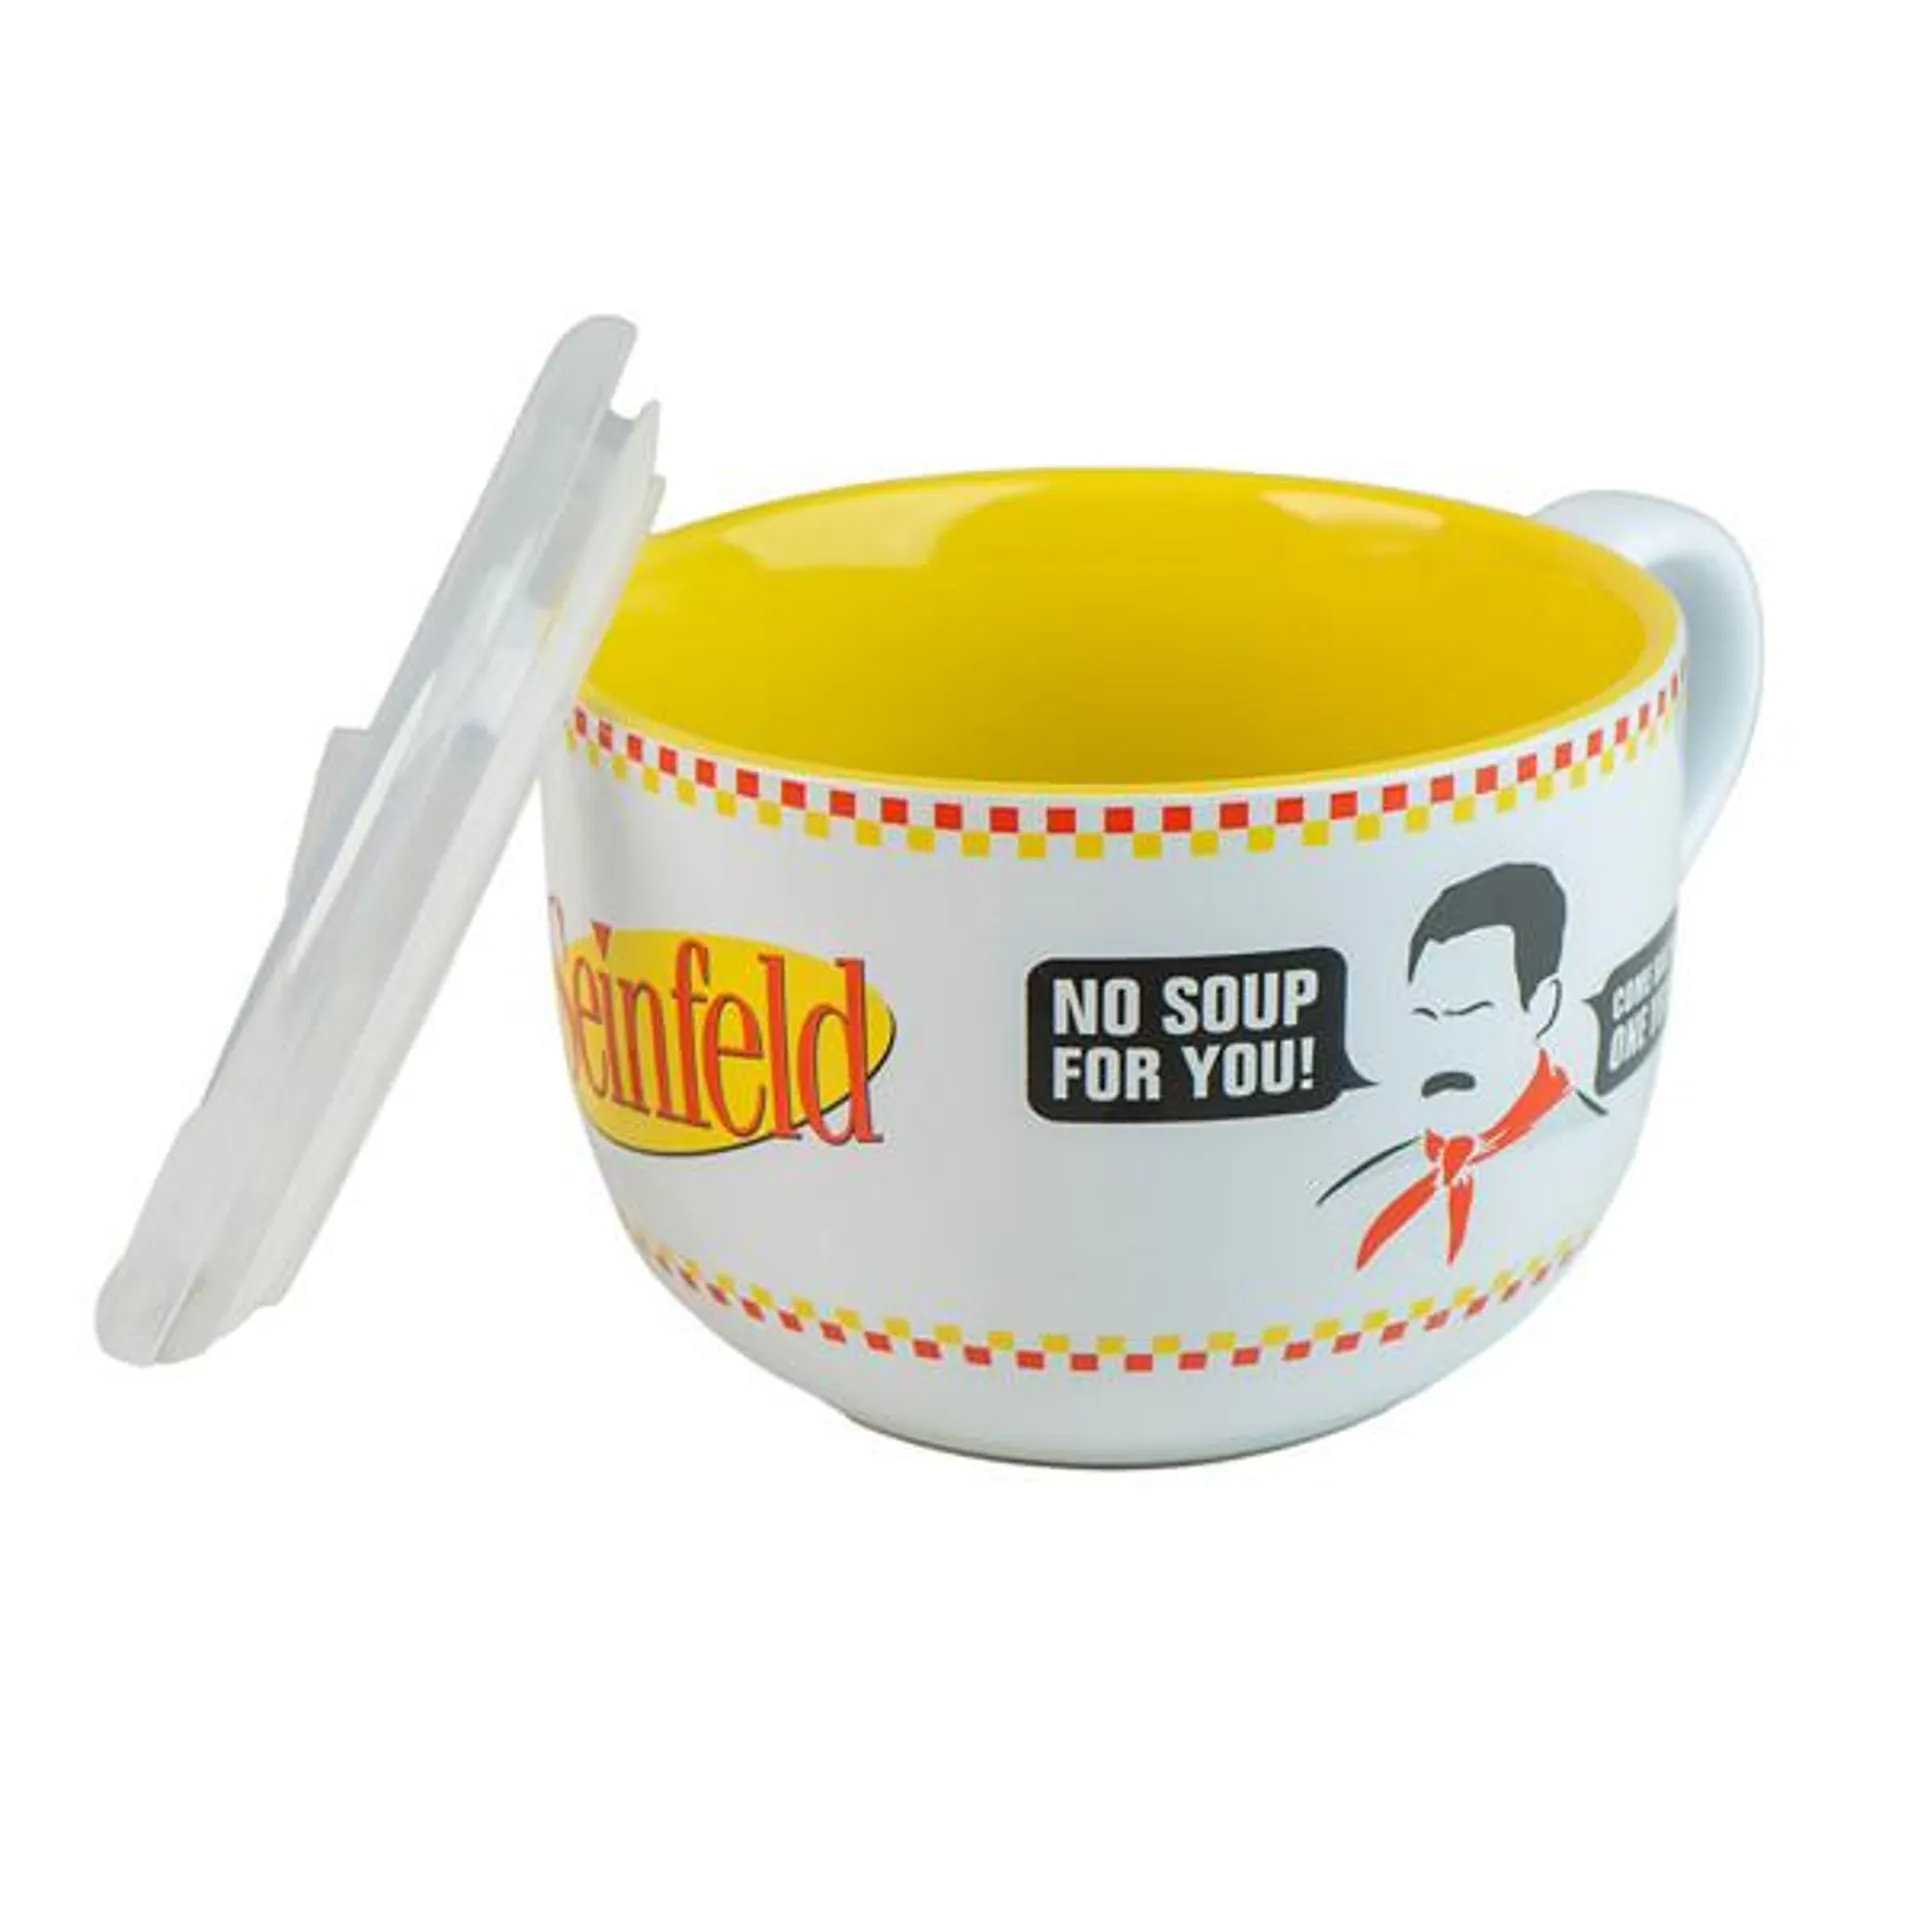 Seinfeld - No Soup for You Soup Bowl with Lid